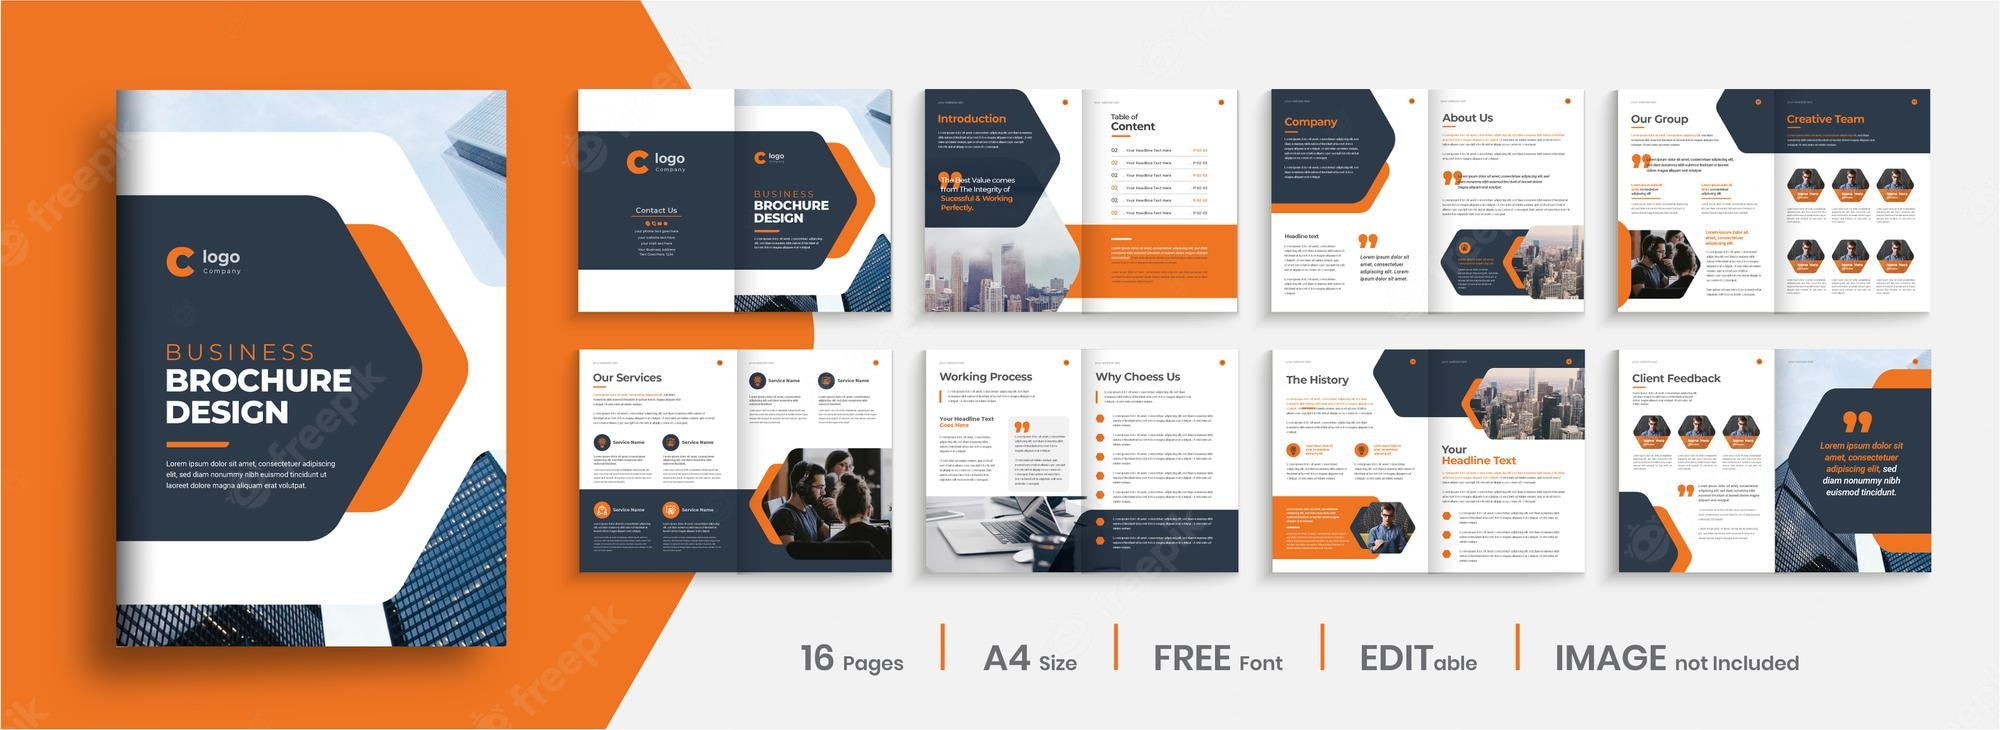 Brochure Images - Free Download on Freepik Pertaining To Online Free Brochure Design Templates